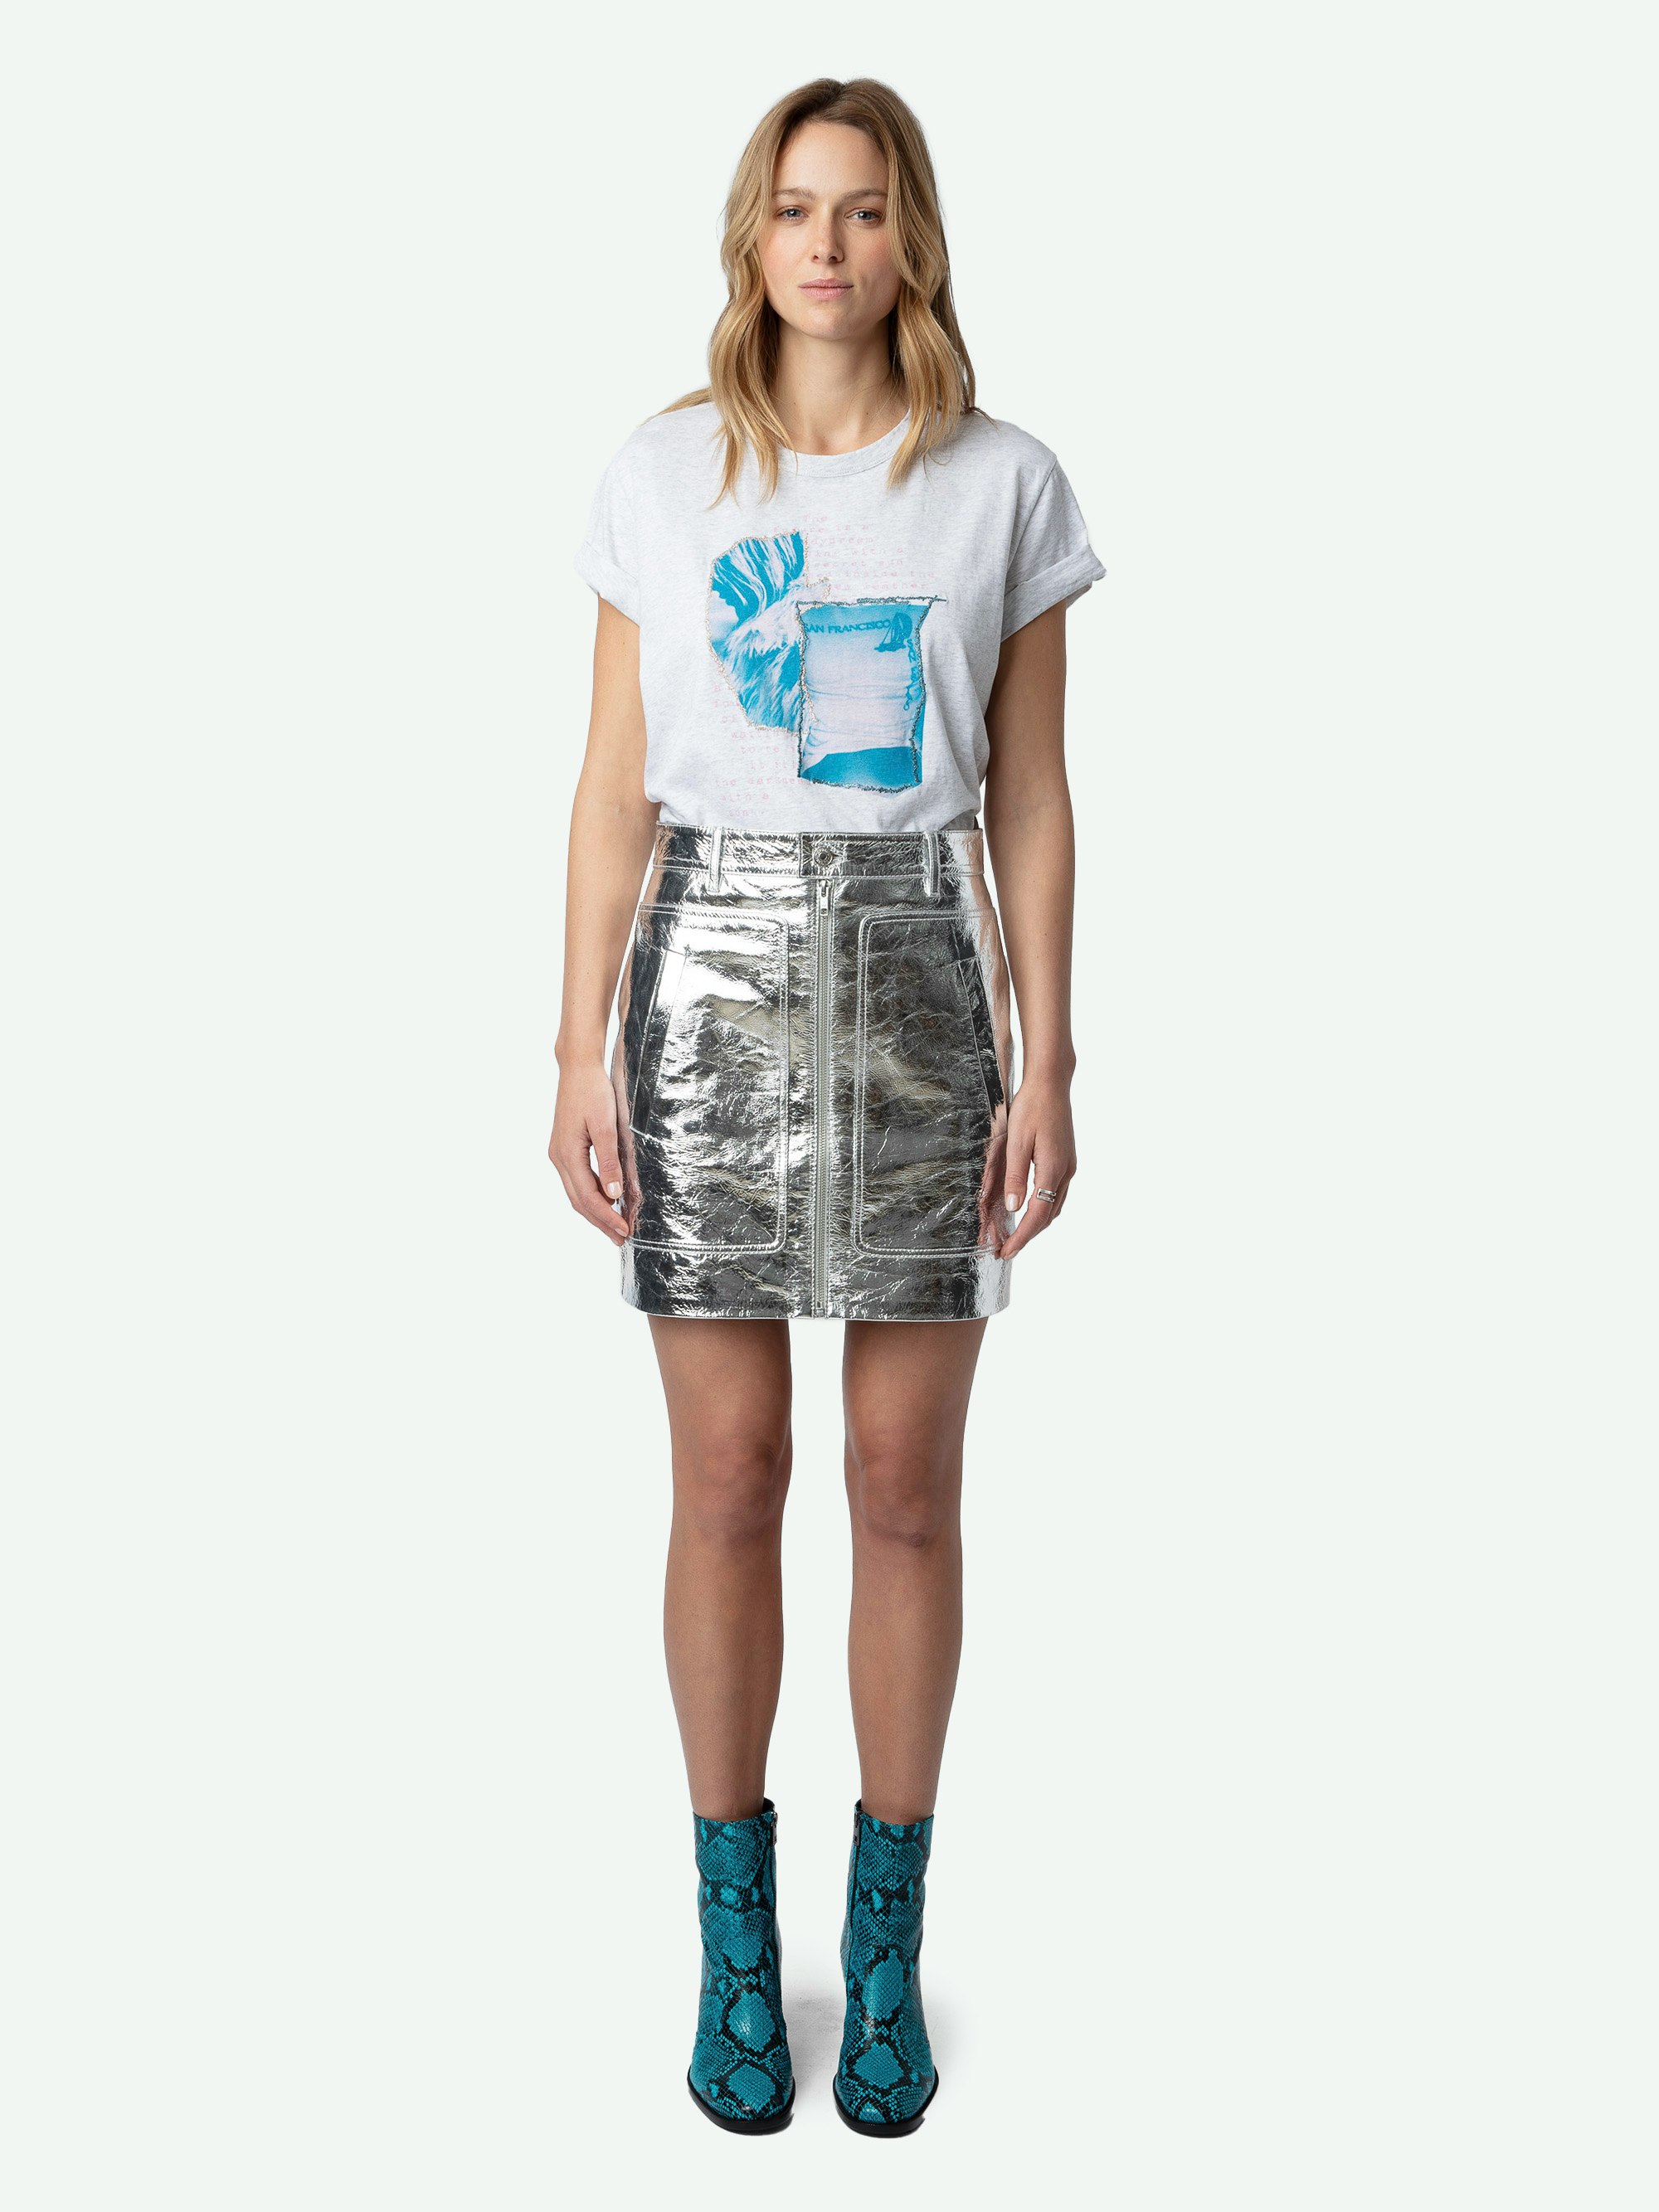 Anya Photoprint T-shirt - Women's short sleeved t-shirt with teal colored photoprint on front.